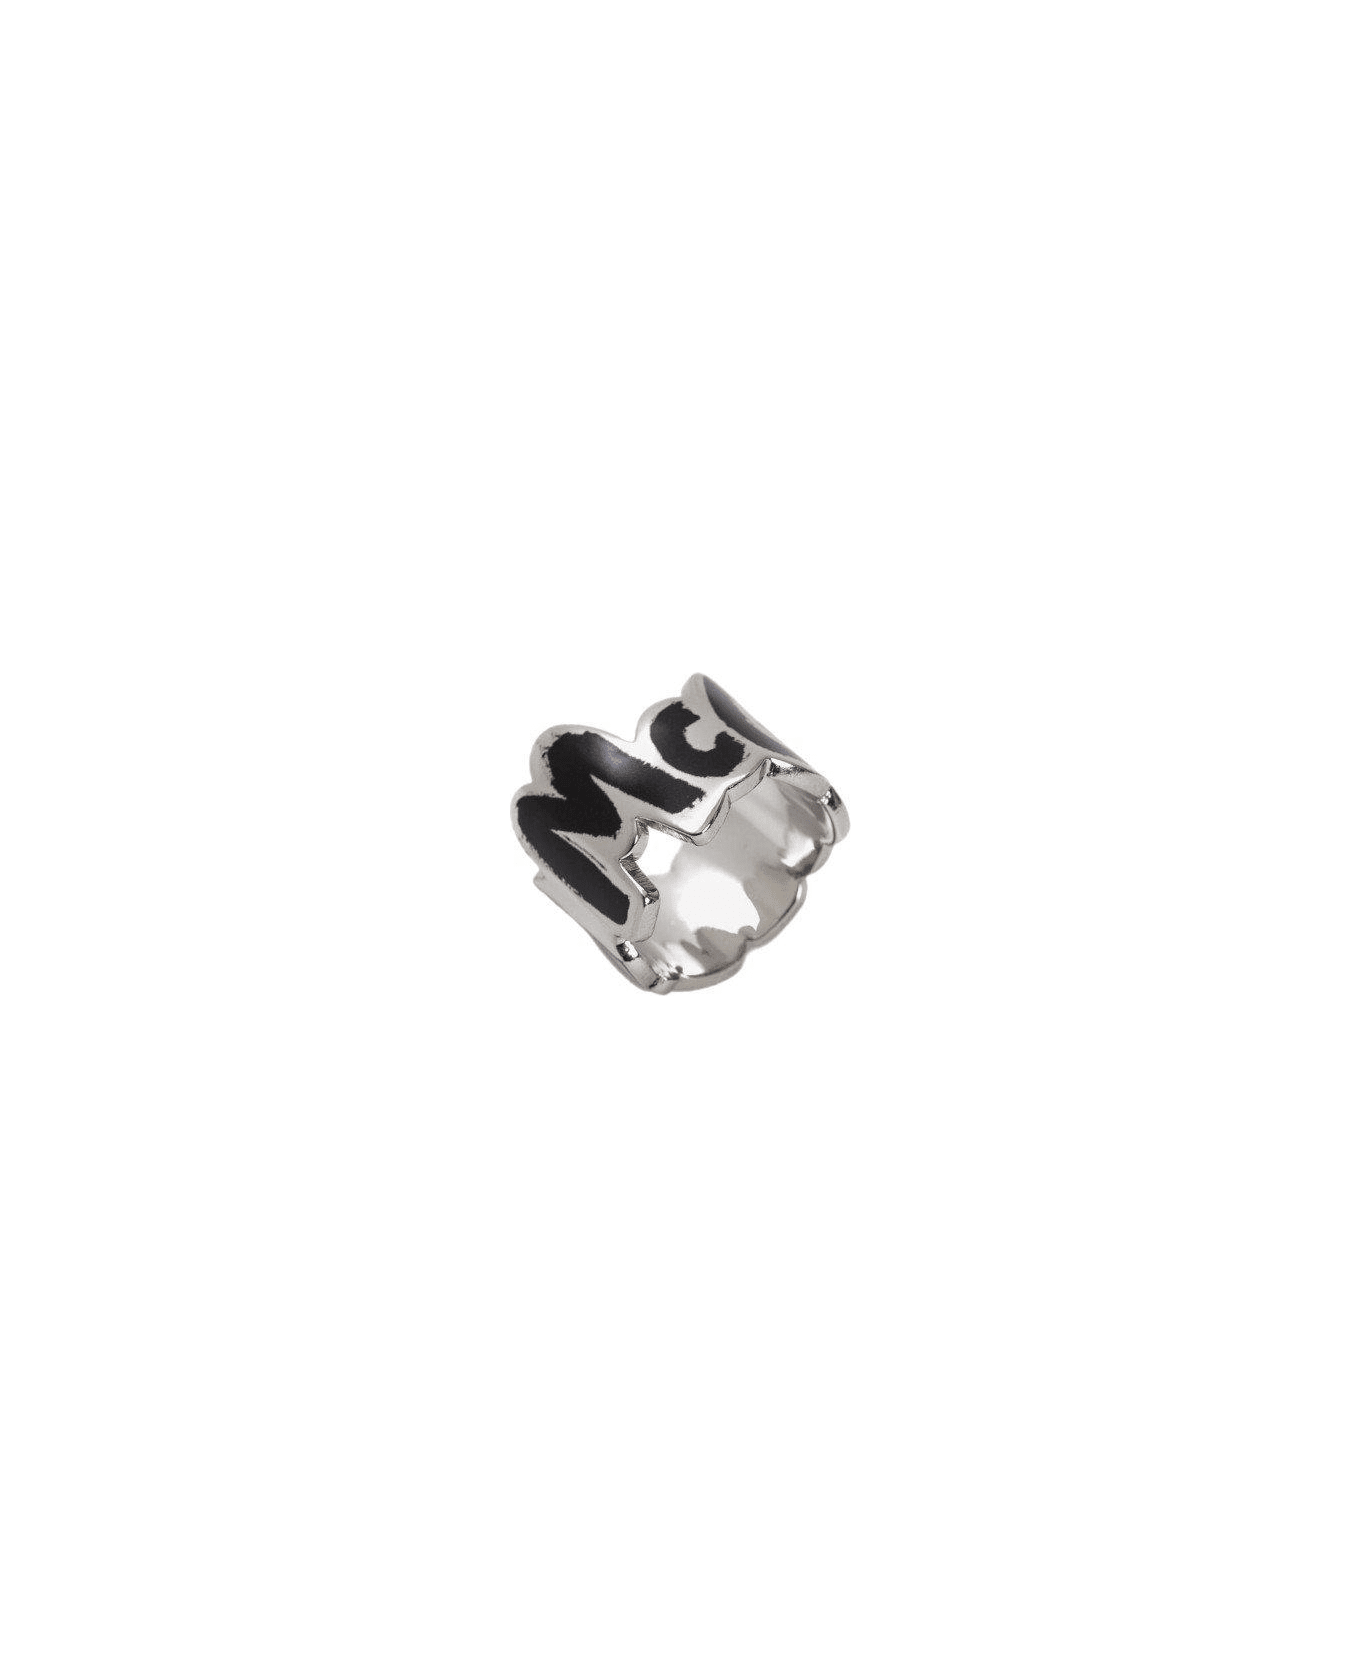 Alexander McQueen Logo Engraved Cut Out Ring - Nero リング